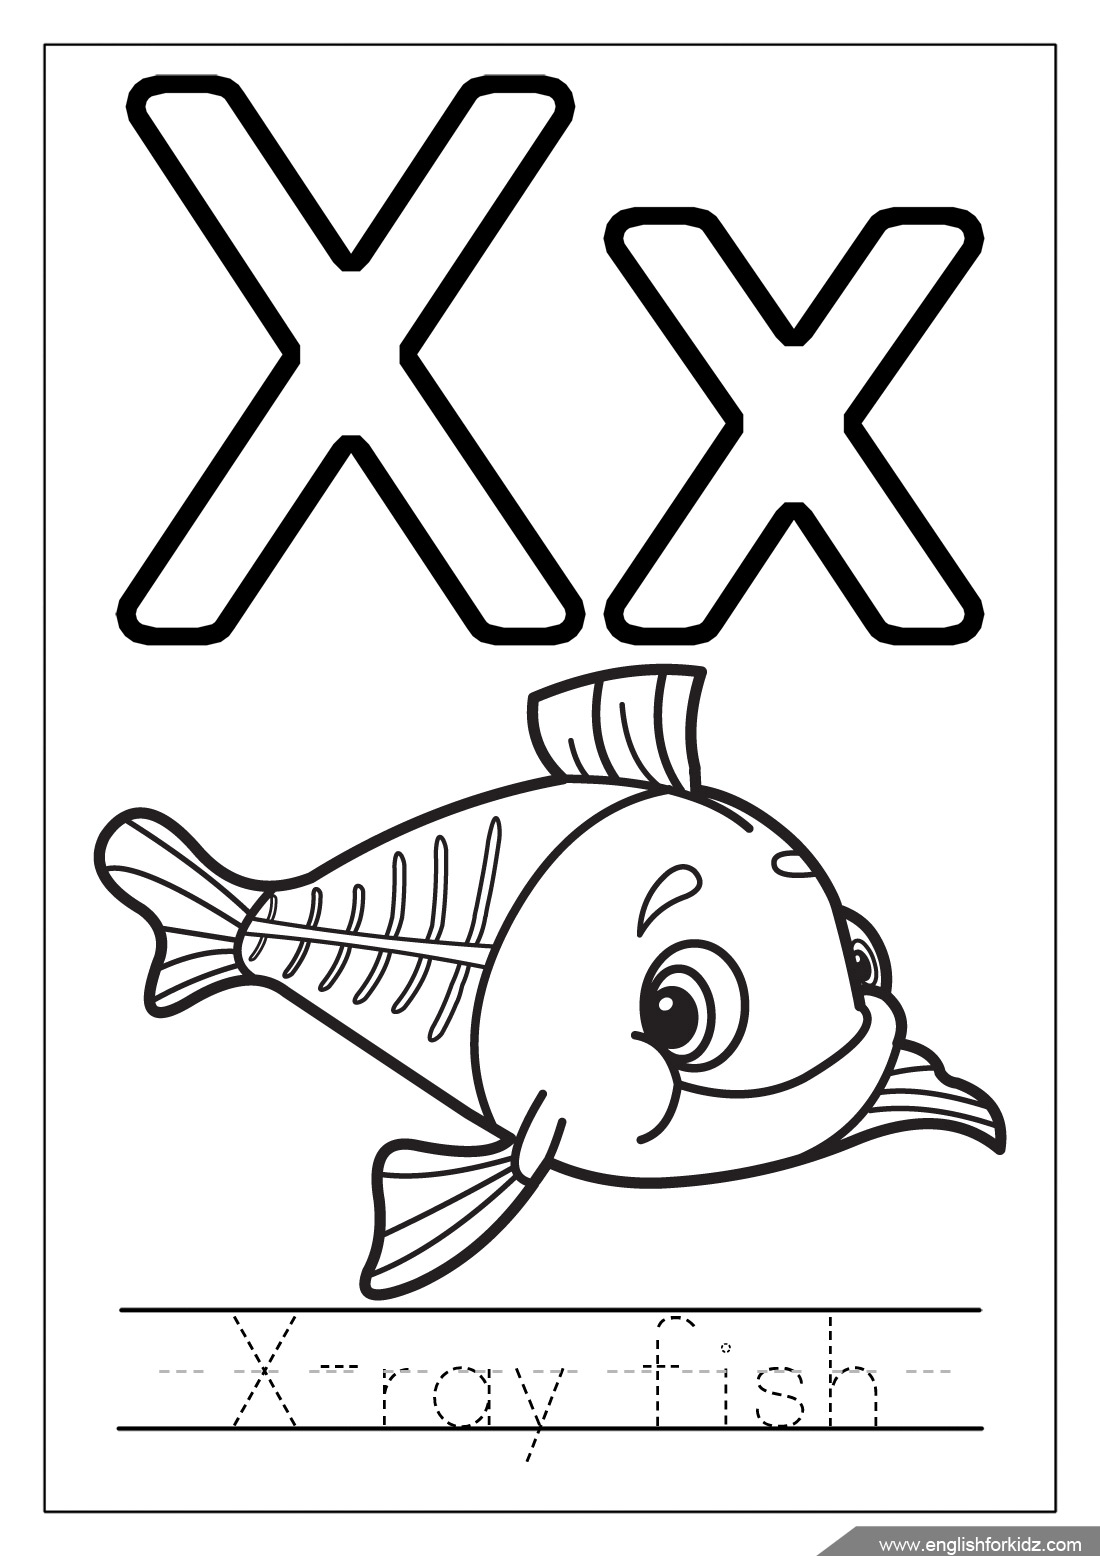 english for kids step by step alphabet coloring pages letters u z